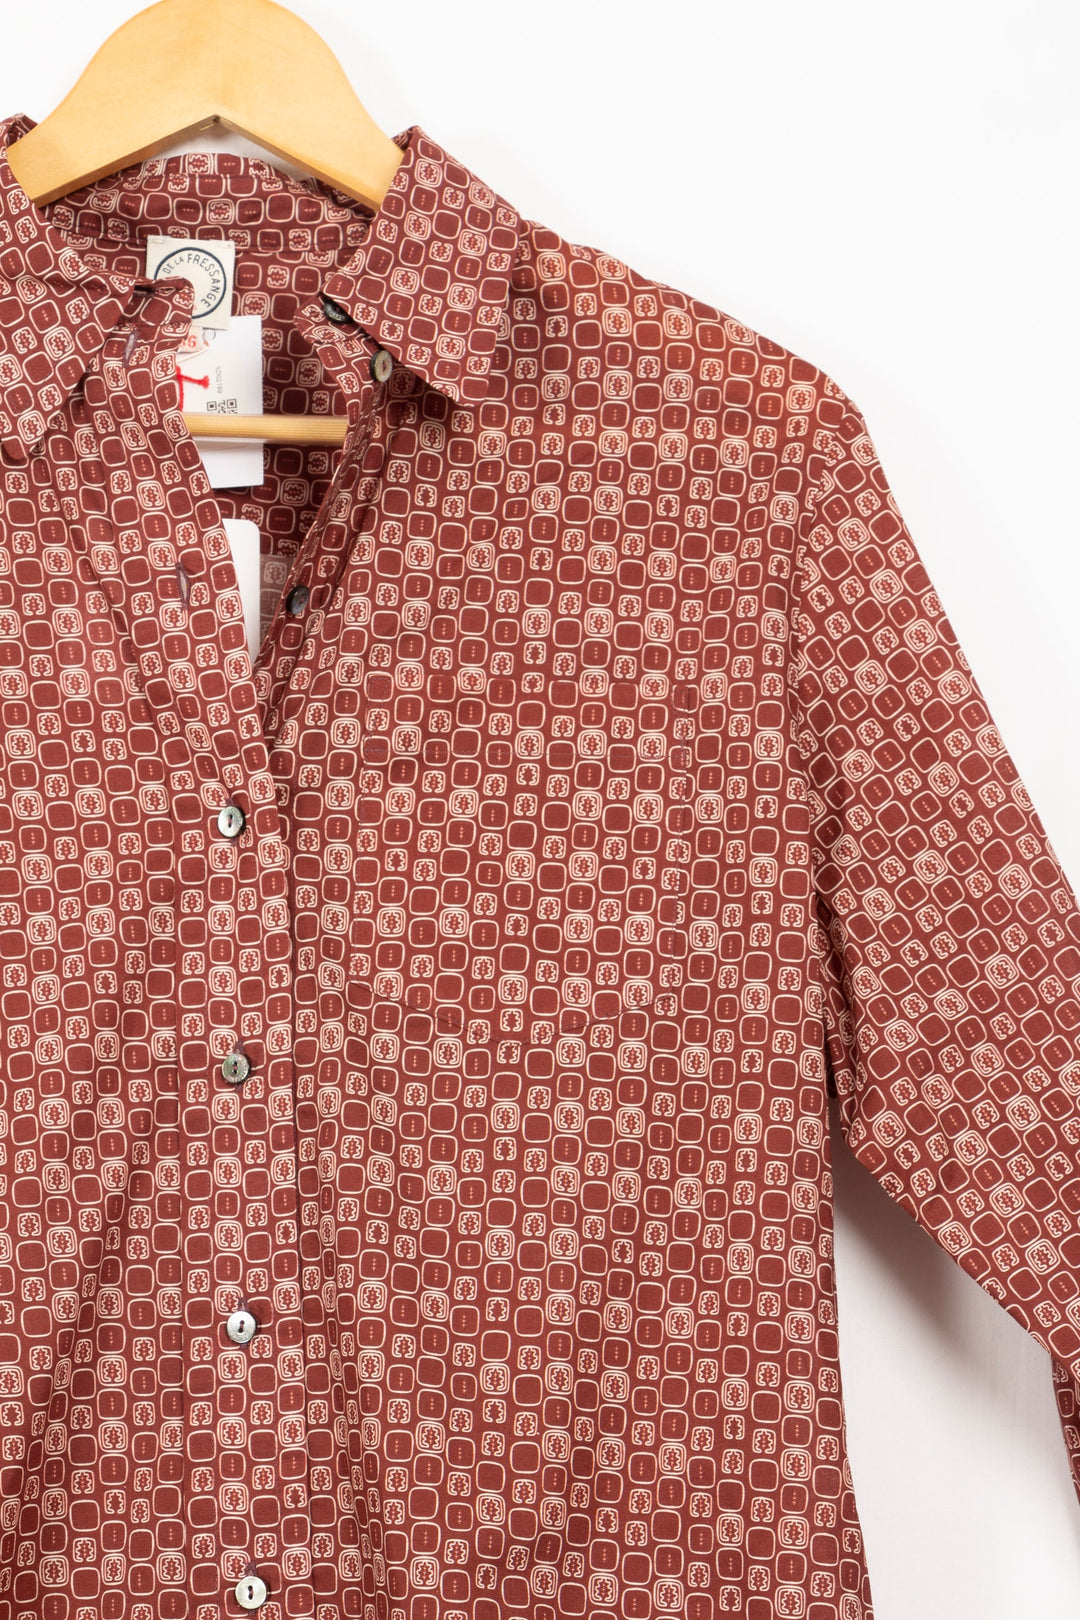 Red shirt with white patterns - 36